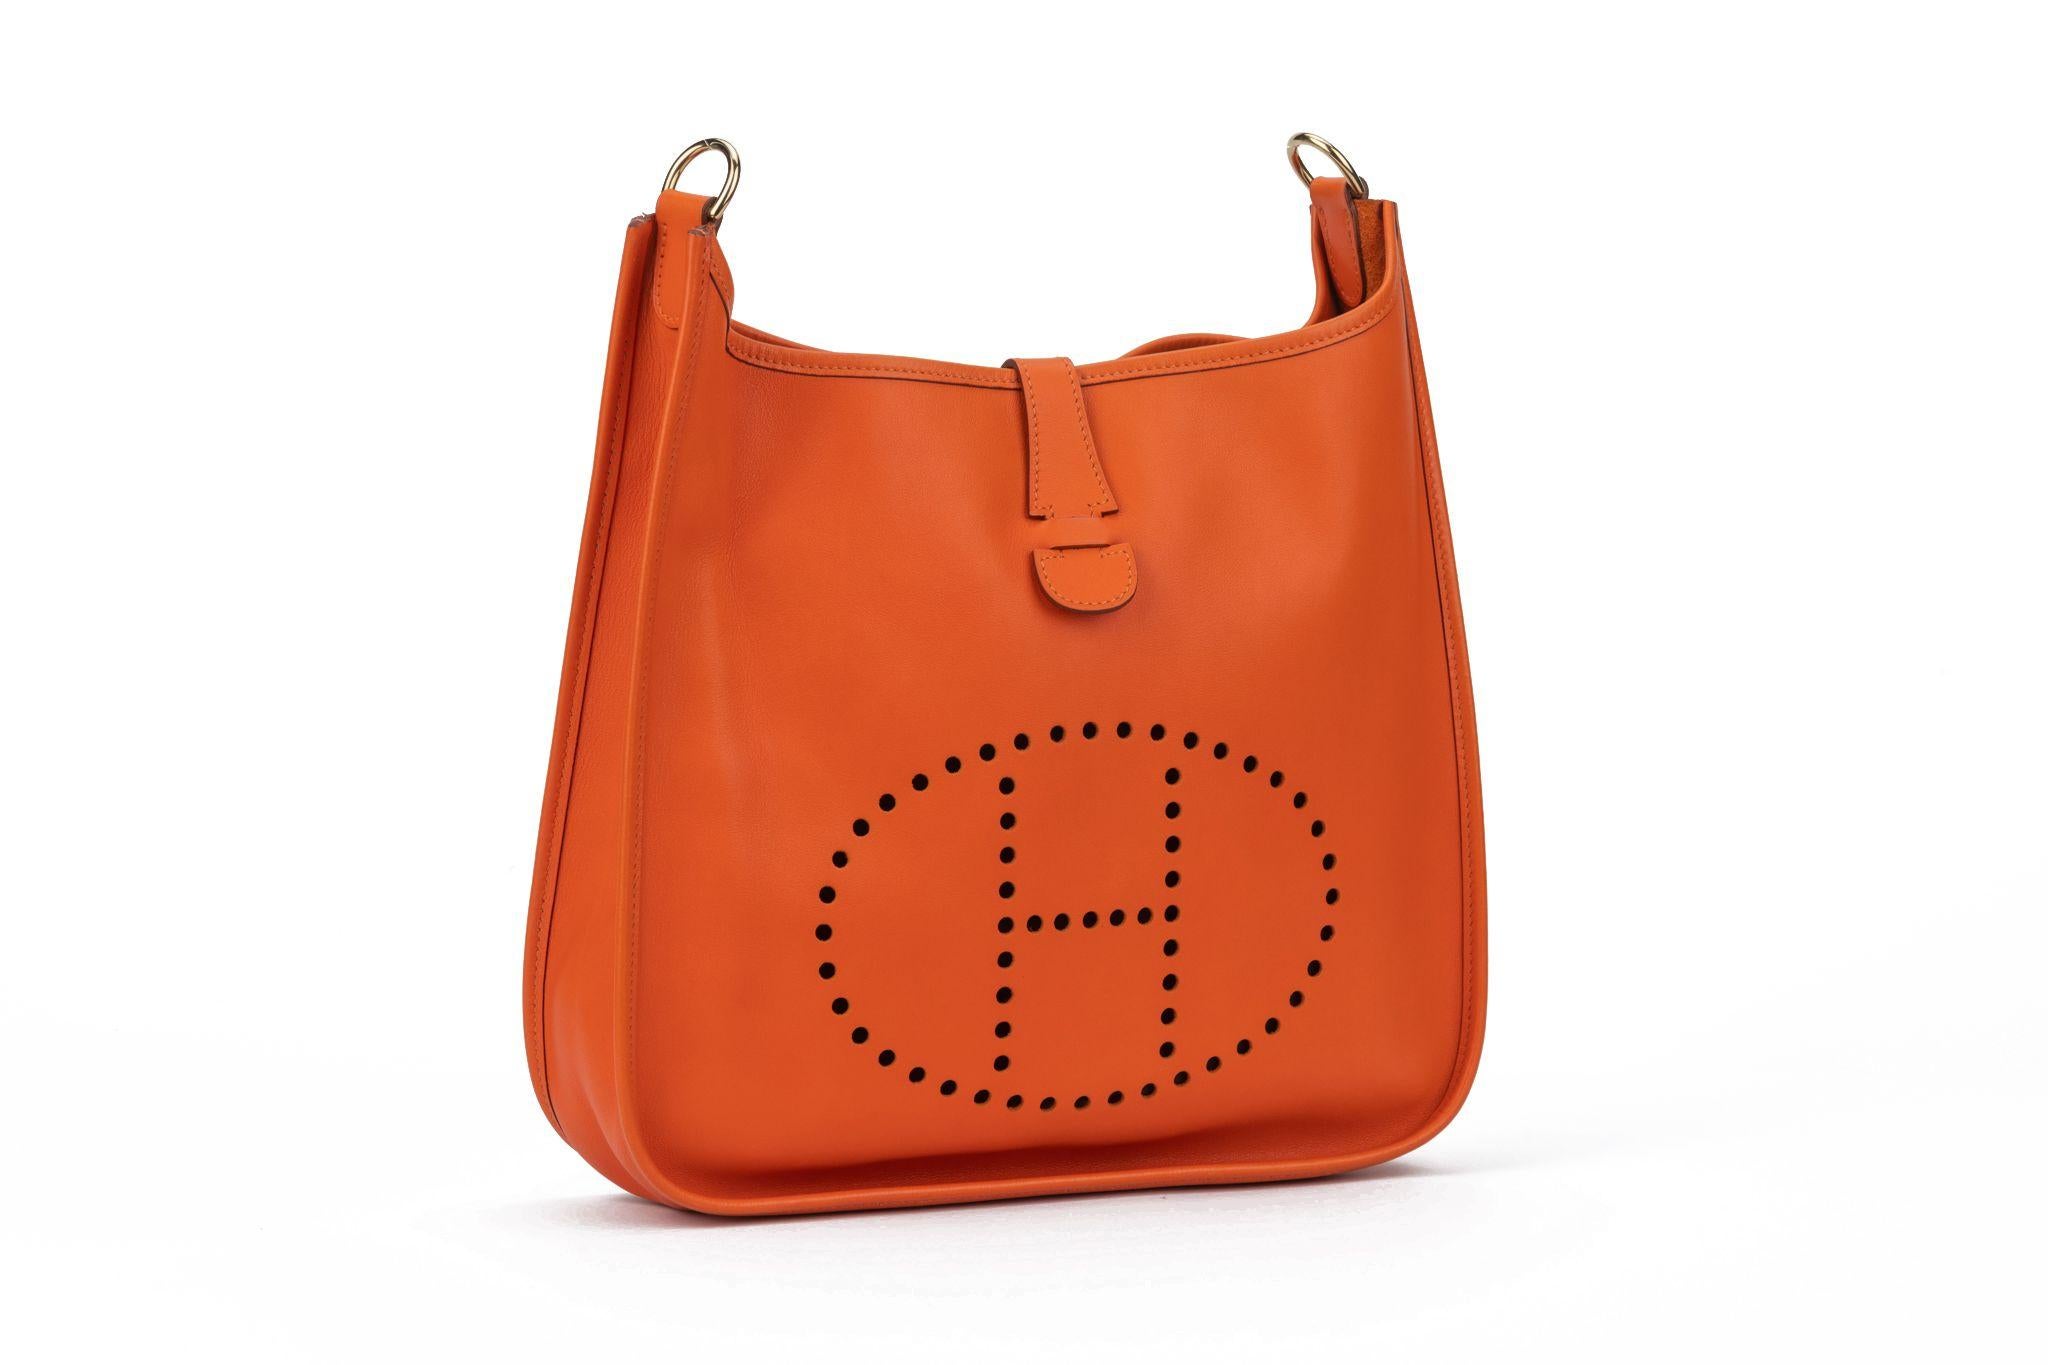 Hermès Evelyne GM featuring swift leather in orange. It comes with palladium gold hardware and has a shoulder strap made of fabric. Date stamp B in a square. The bag is in excellent condition. It comes with the original dustcover.